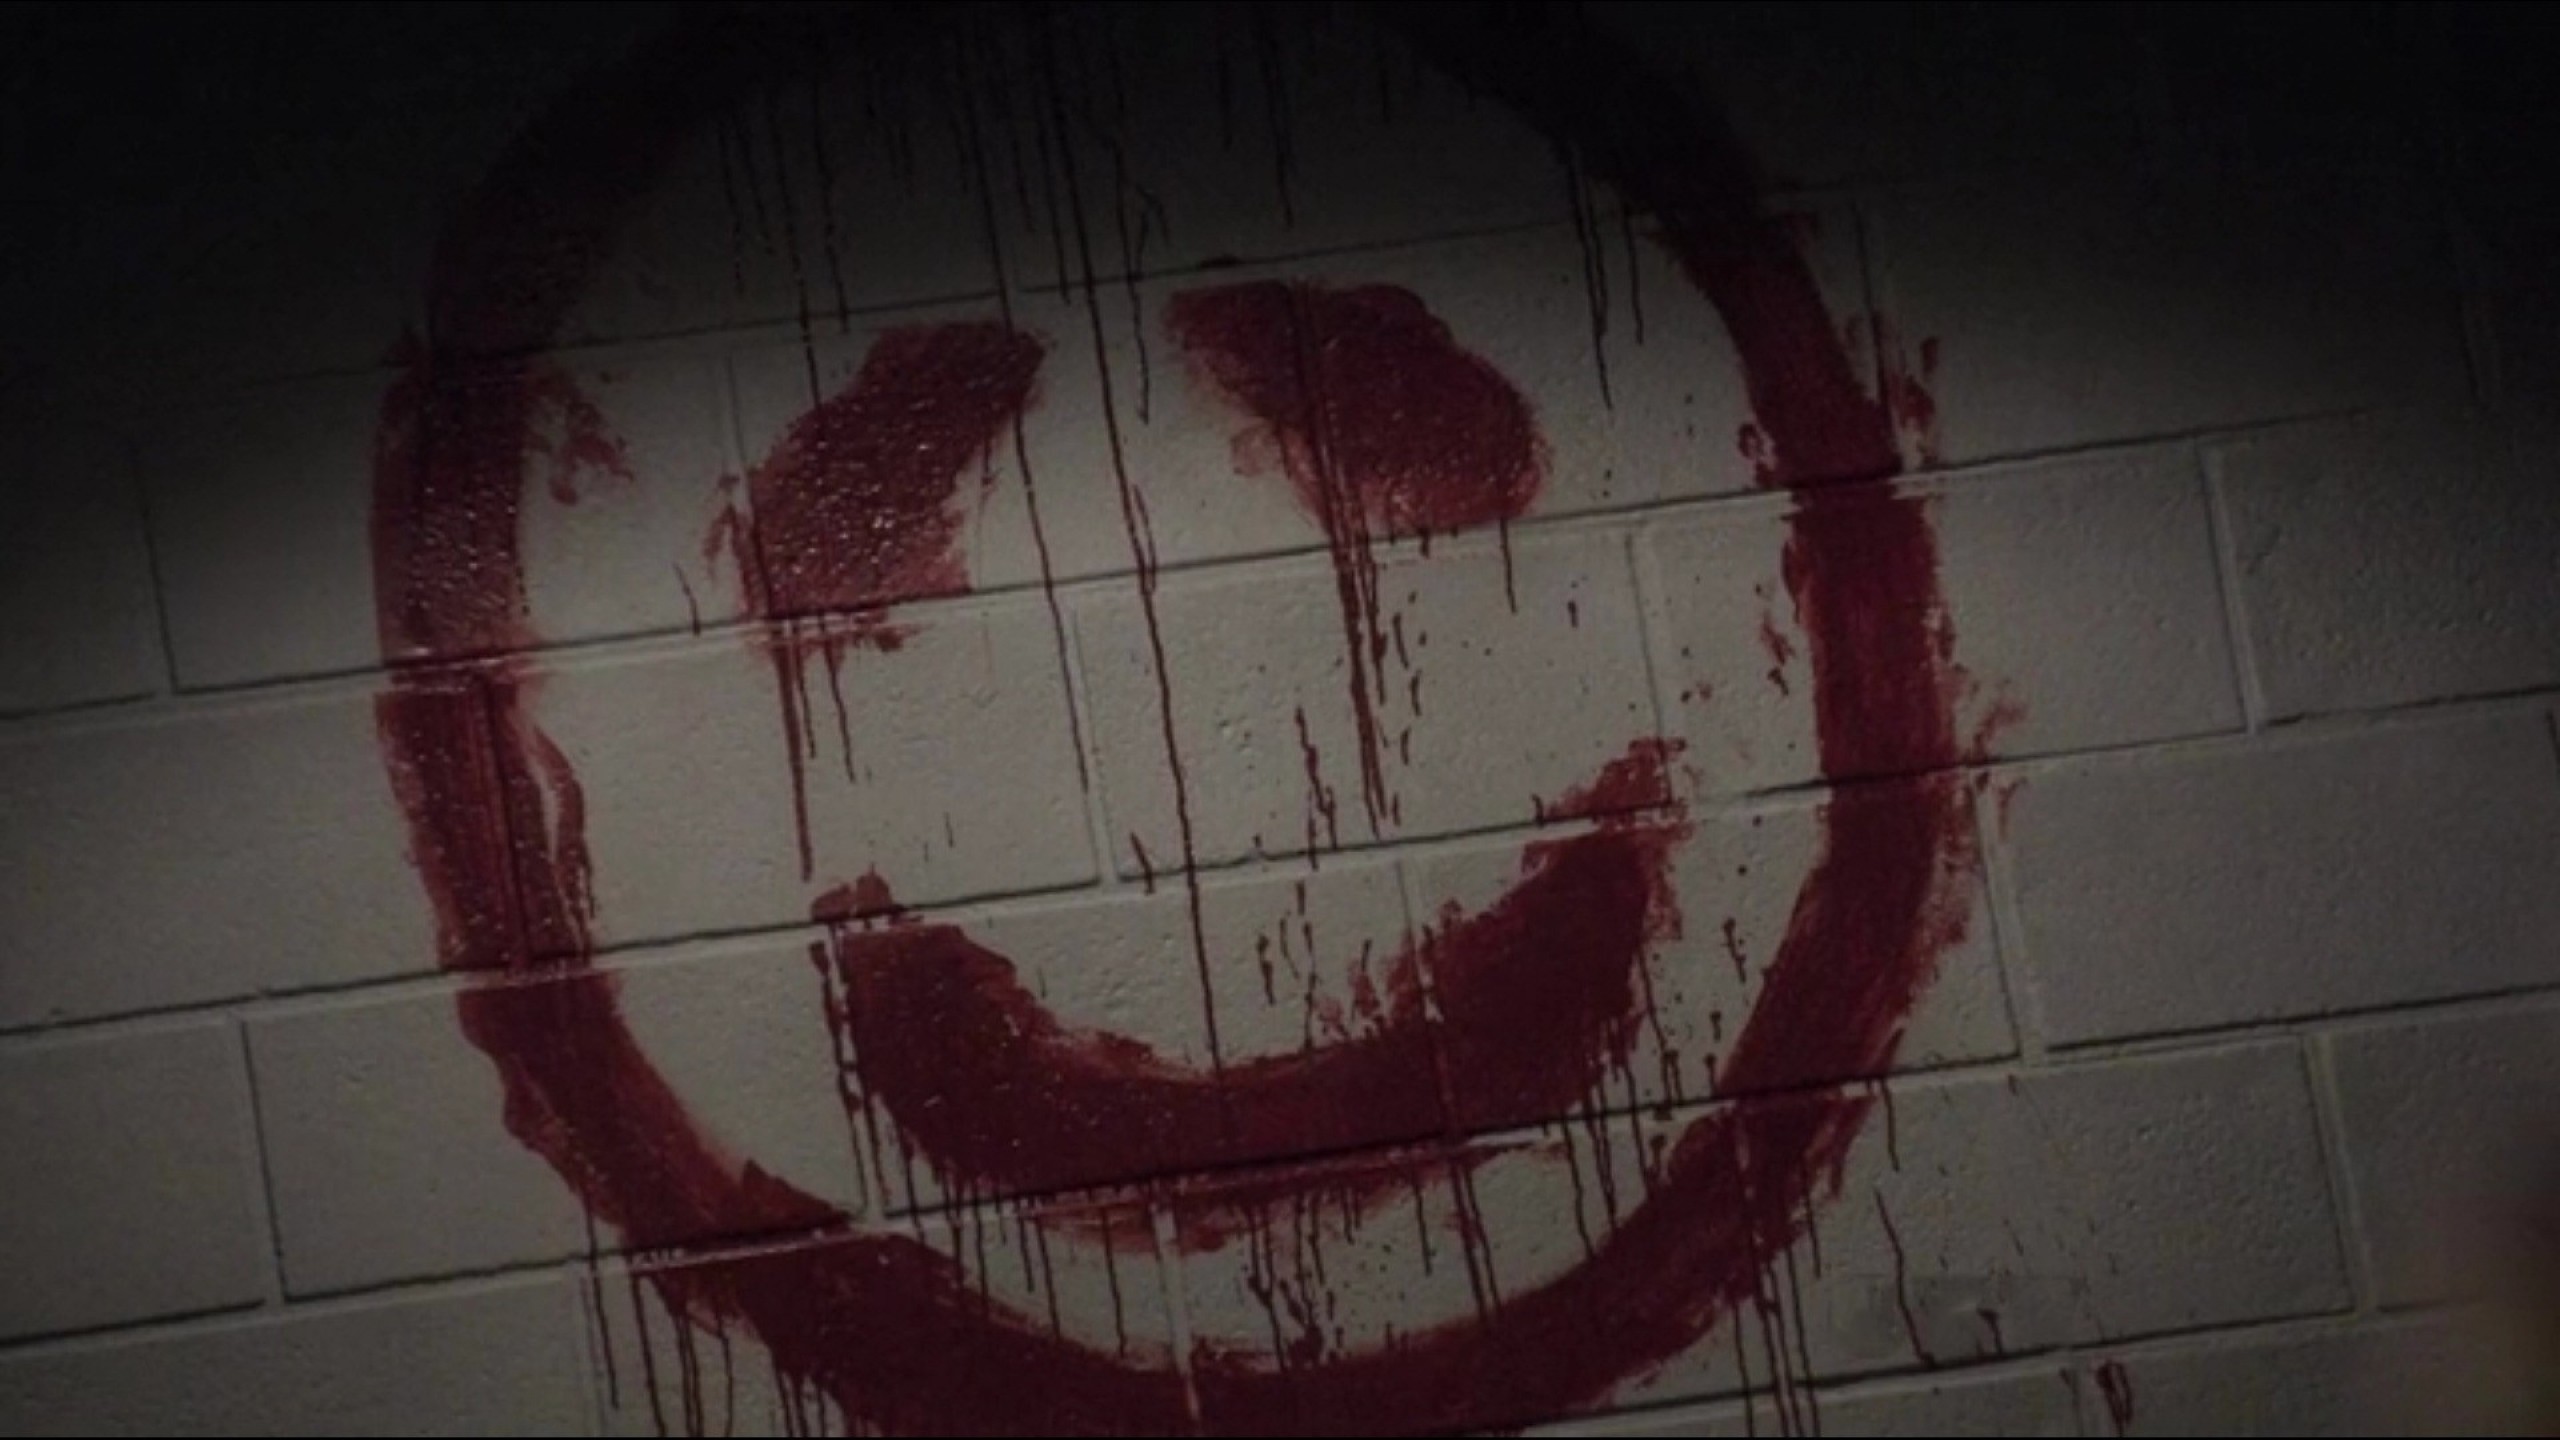 killer wallpaper,red,mouth,circle,pattern,fictional character